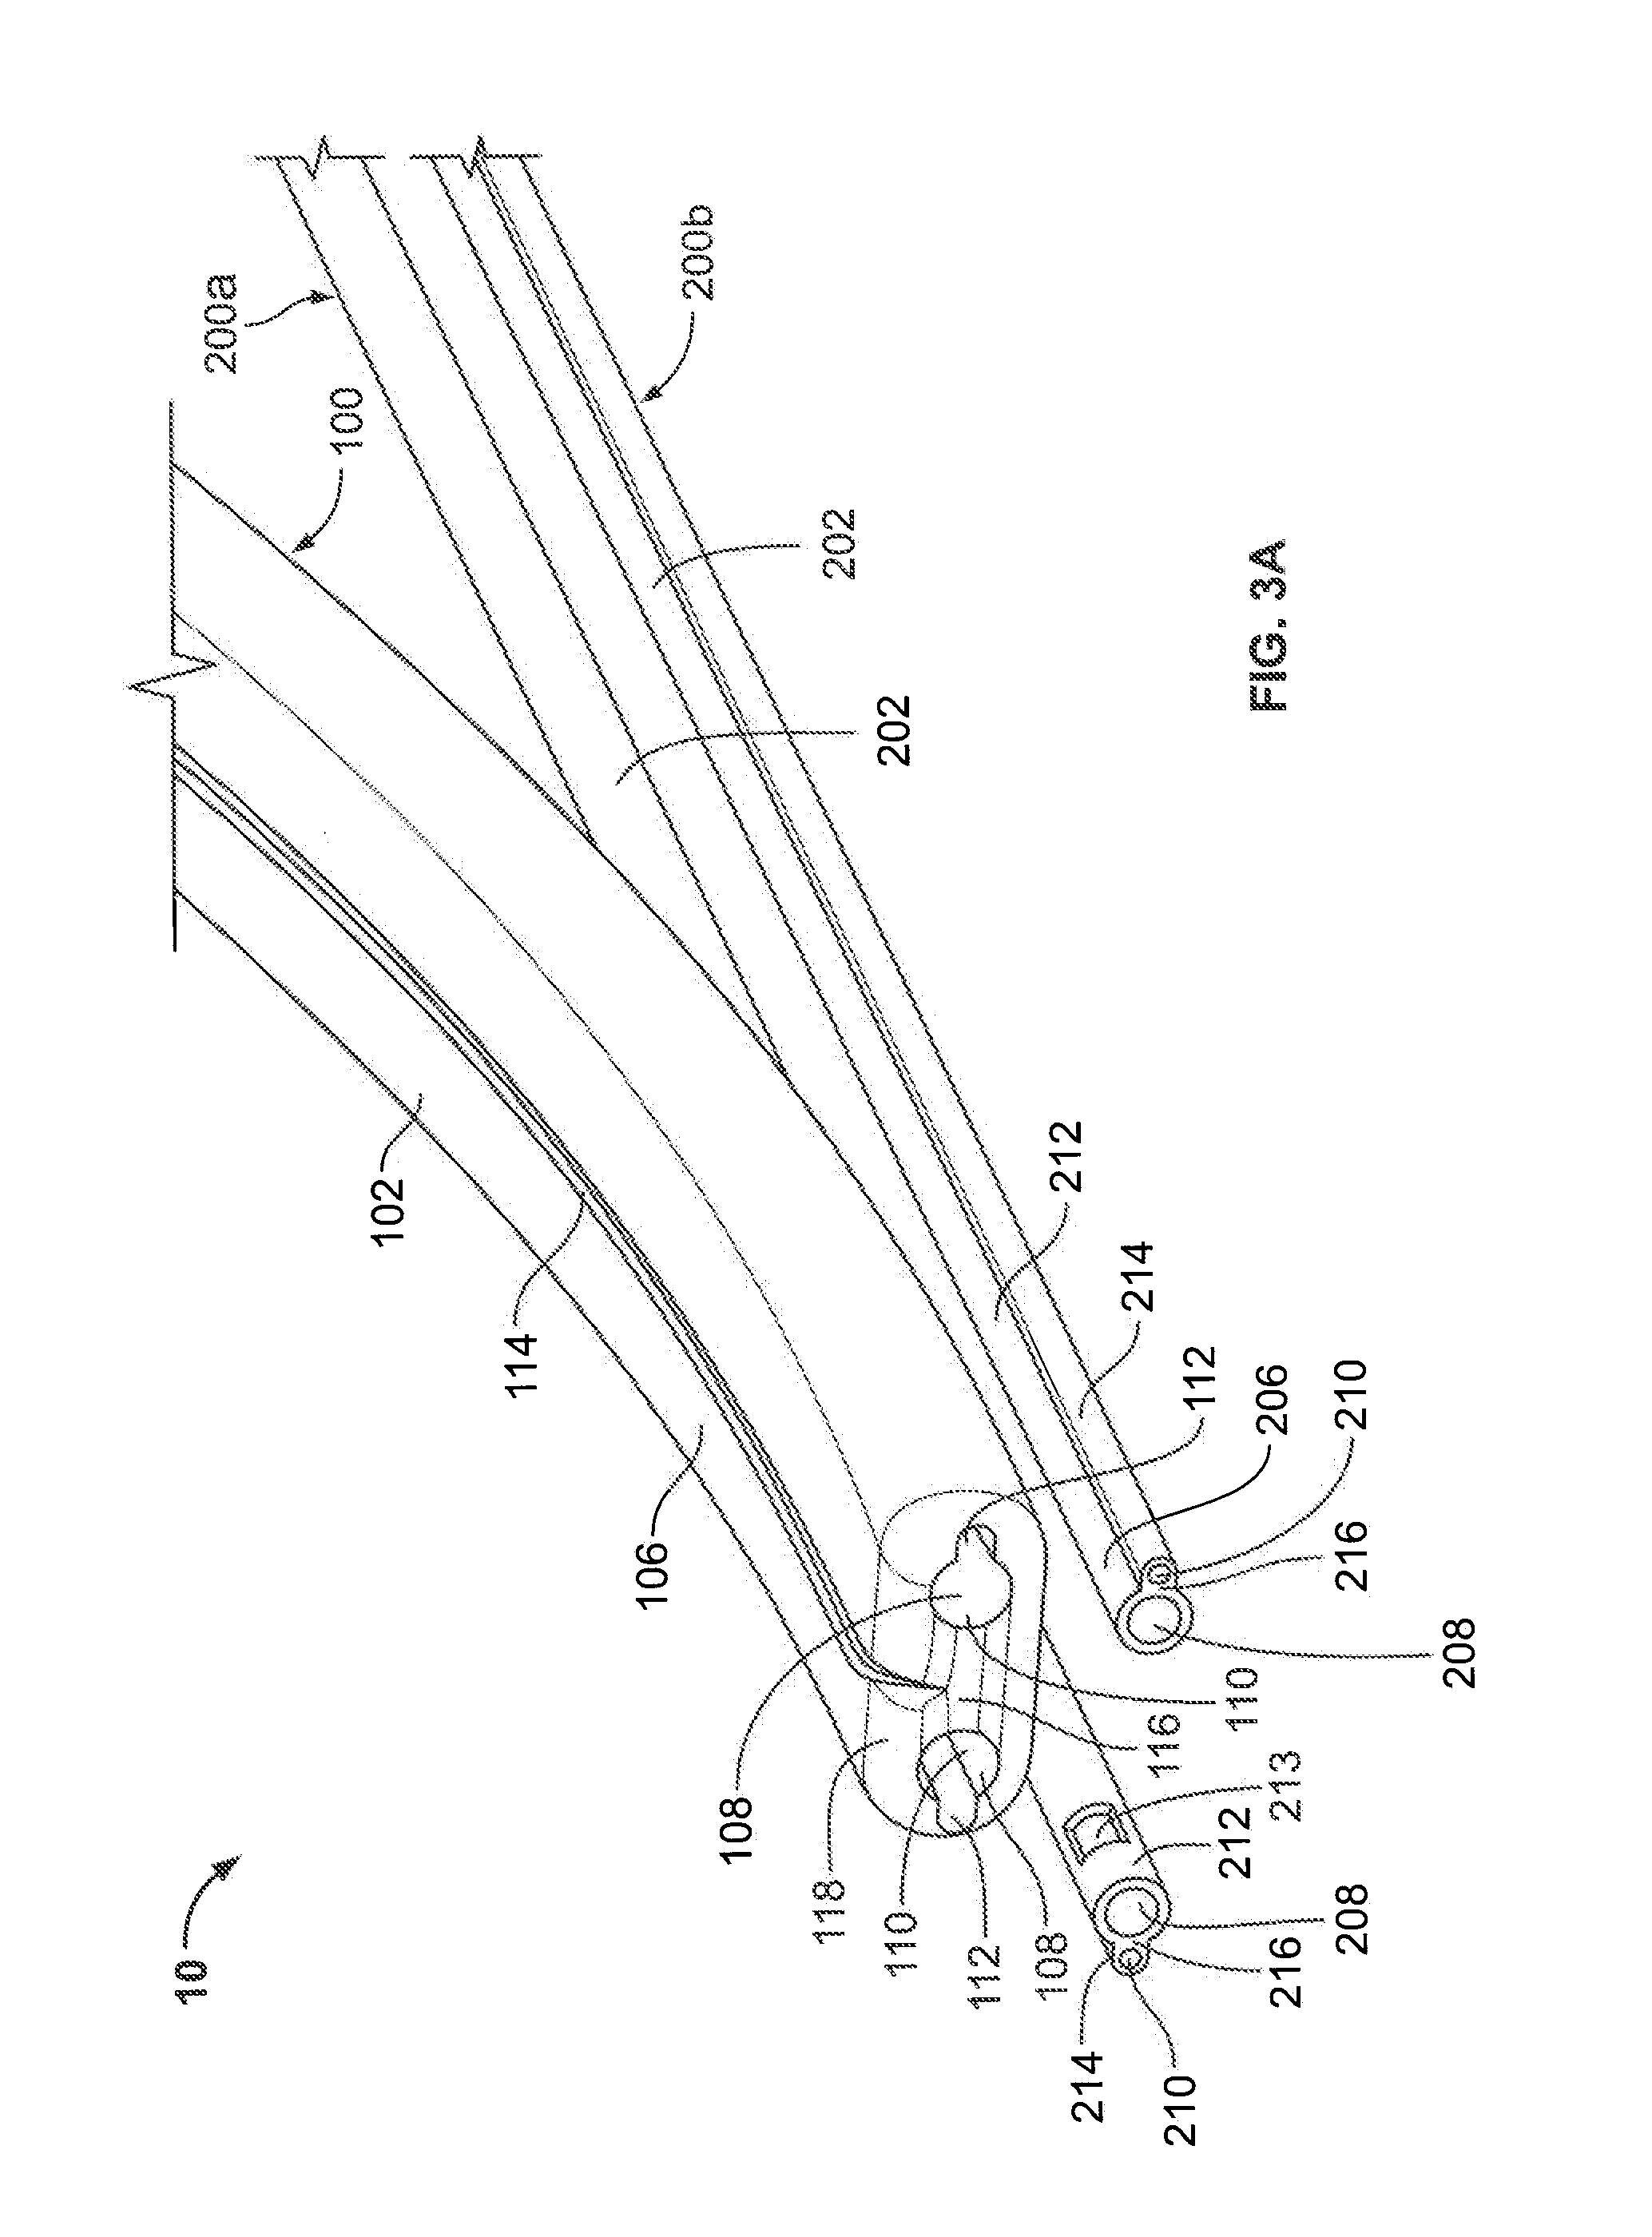 Catheter Systems and Methods of Use